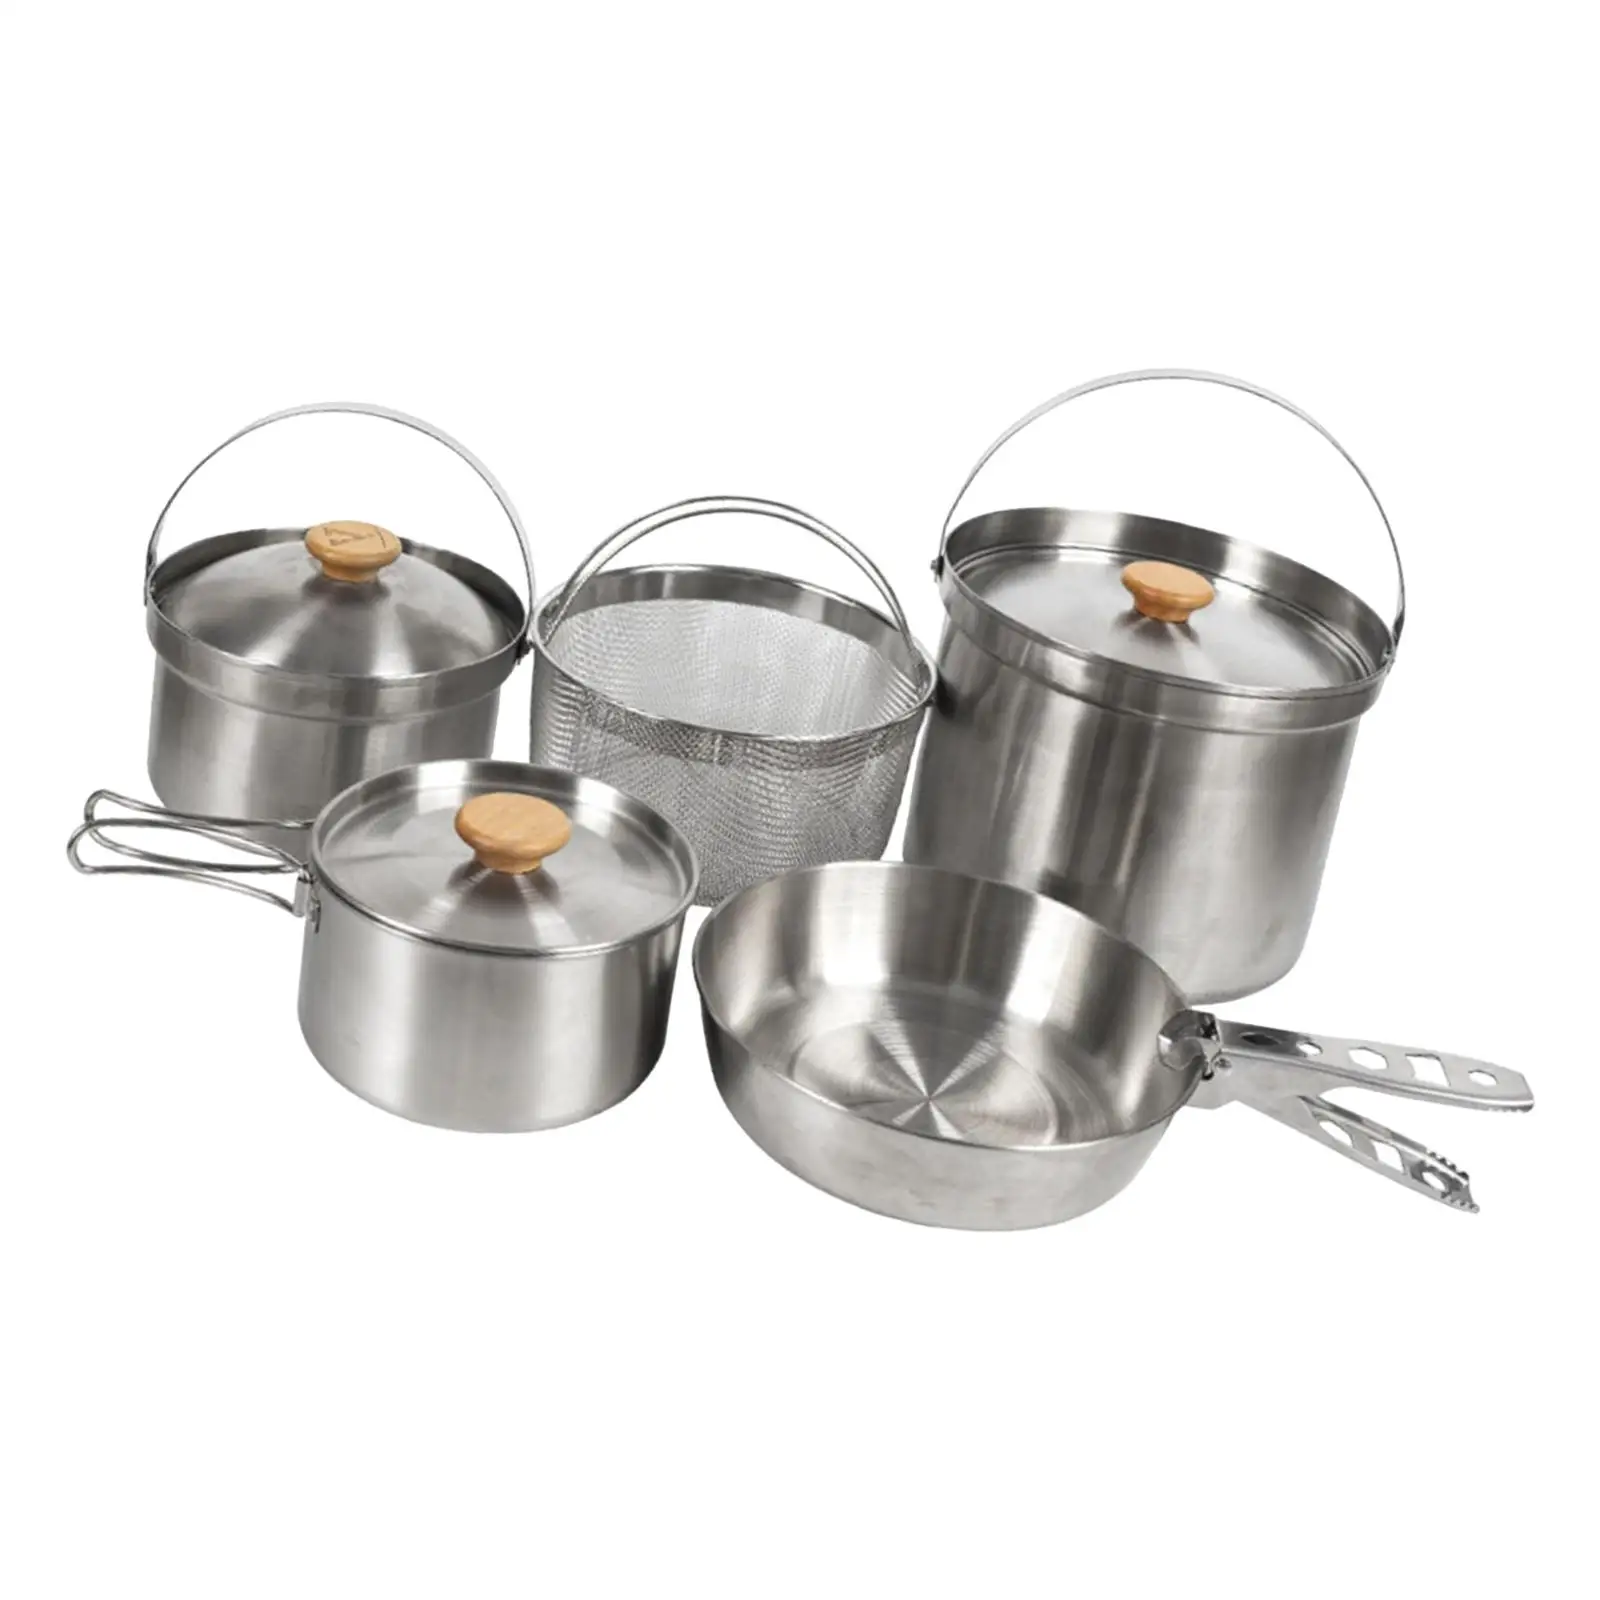 5 Pieces Stainless Steel Cooking Pot Camping Pan Lightweight Household Cookware for BBQ